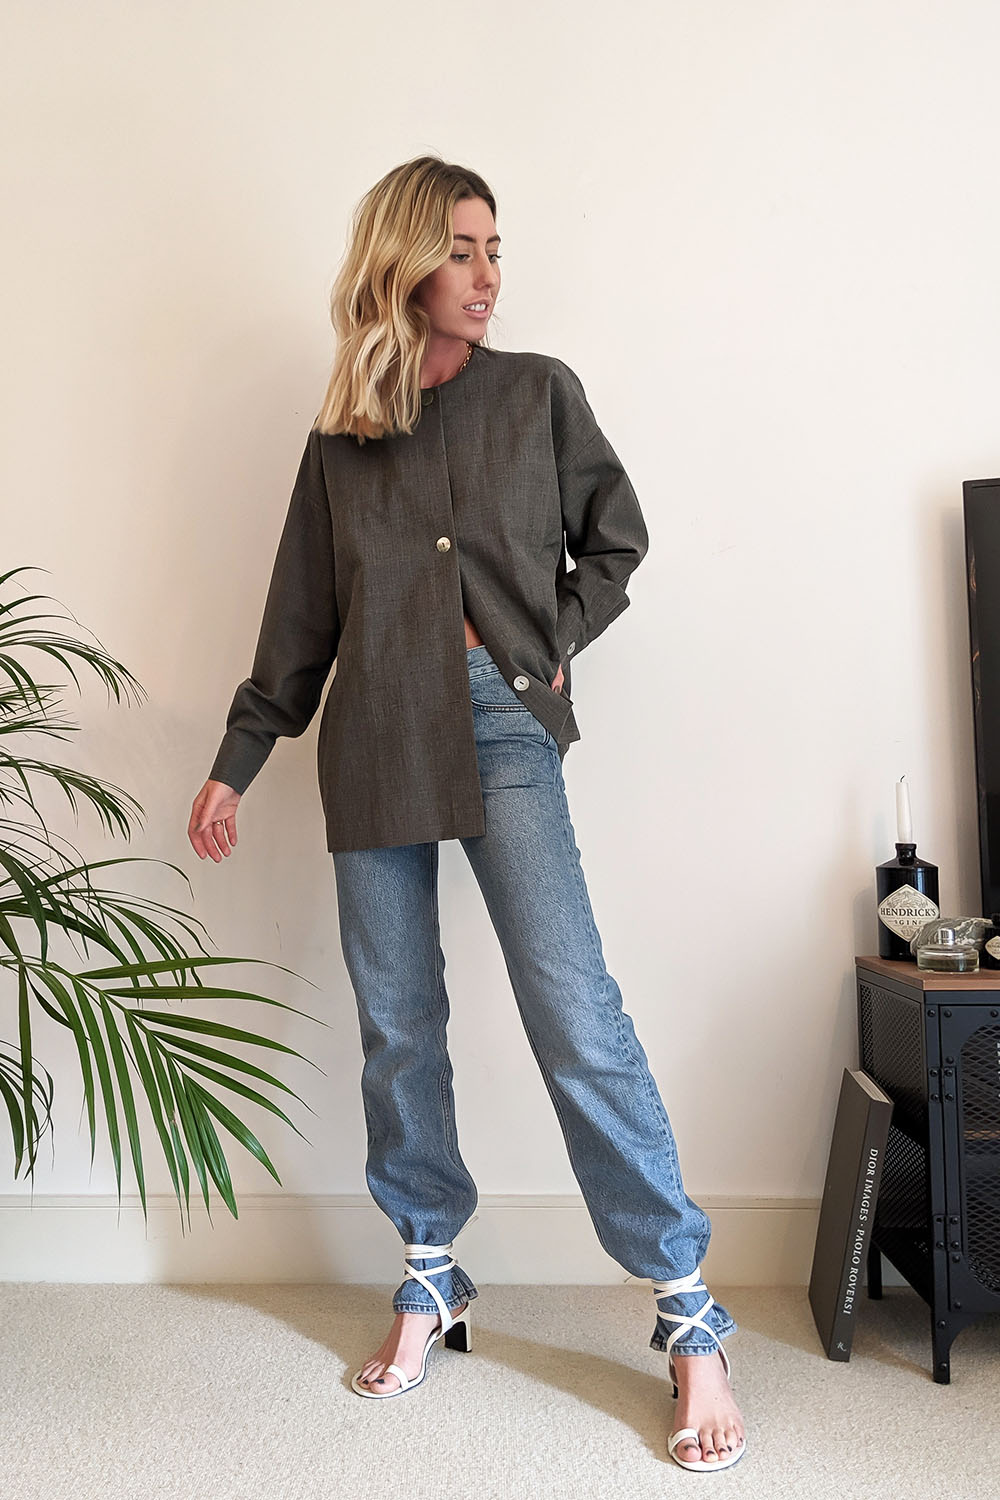 How to Wear StraightLeg Jeans 9 Outfit Ideas Who What Wear UK